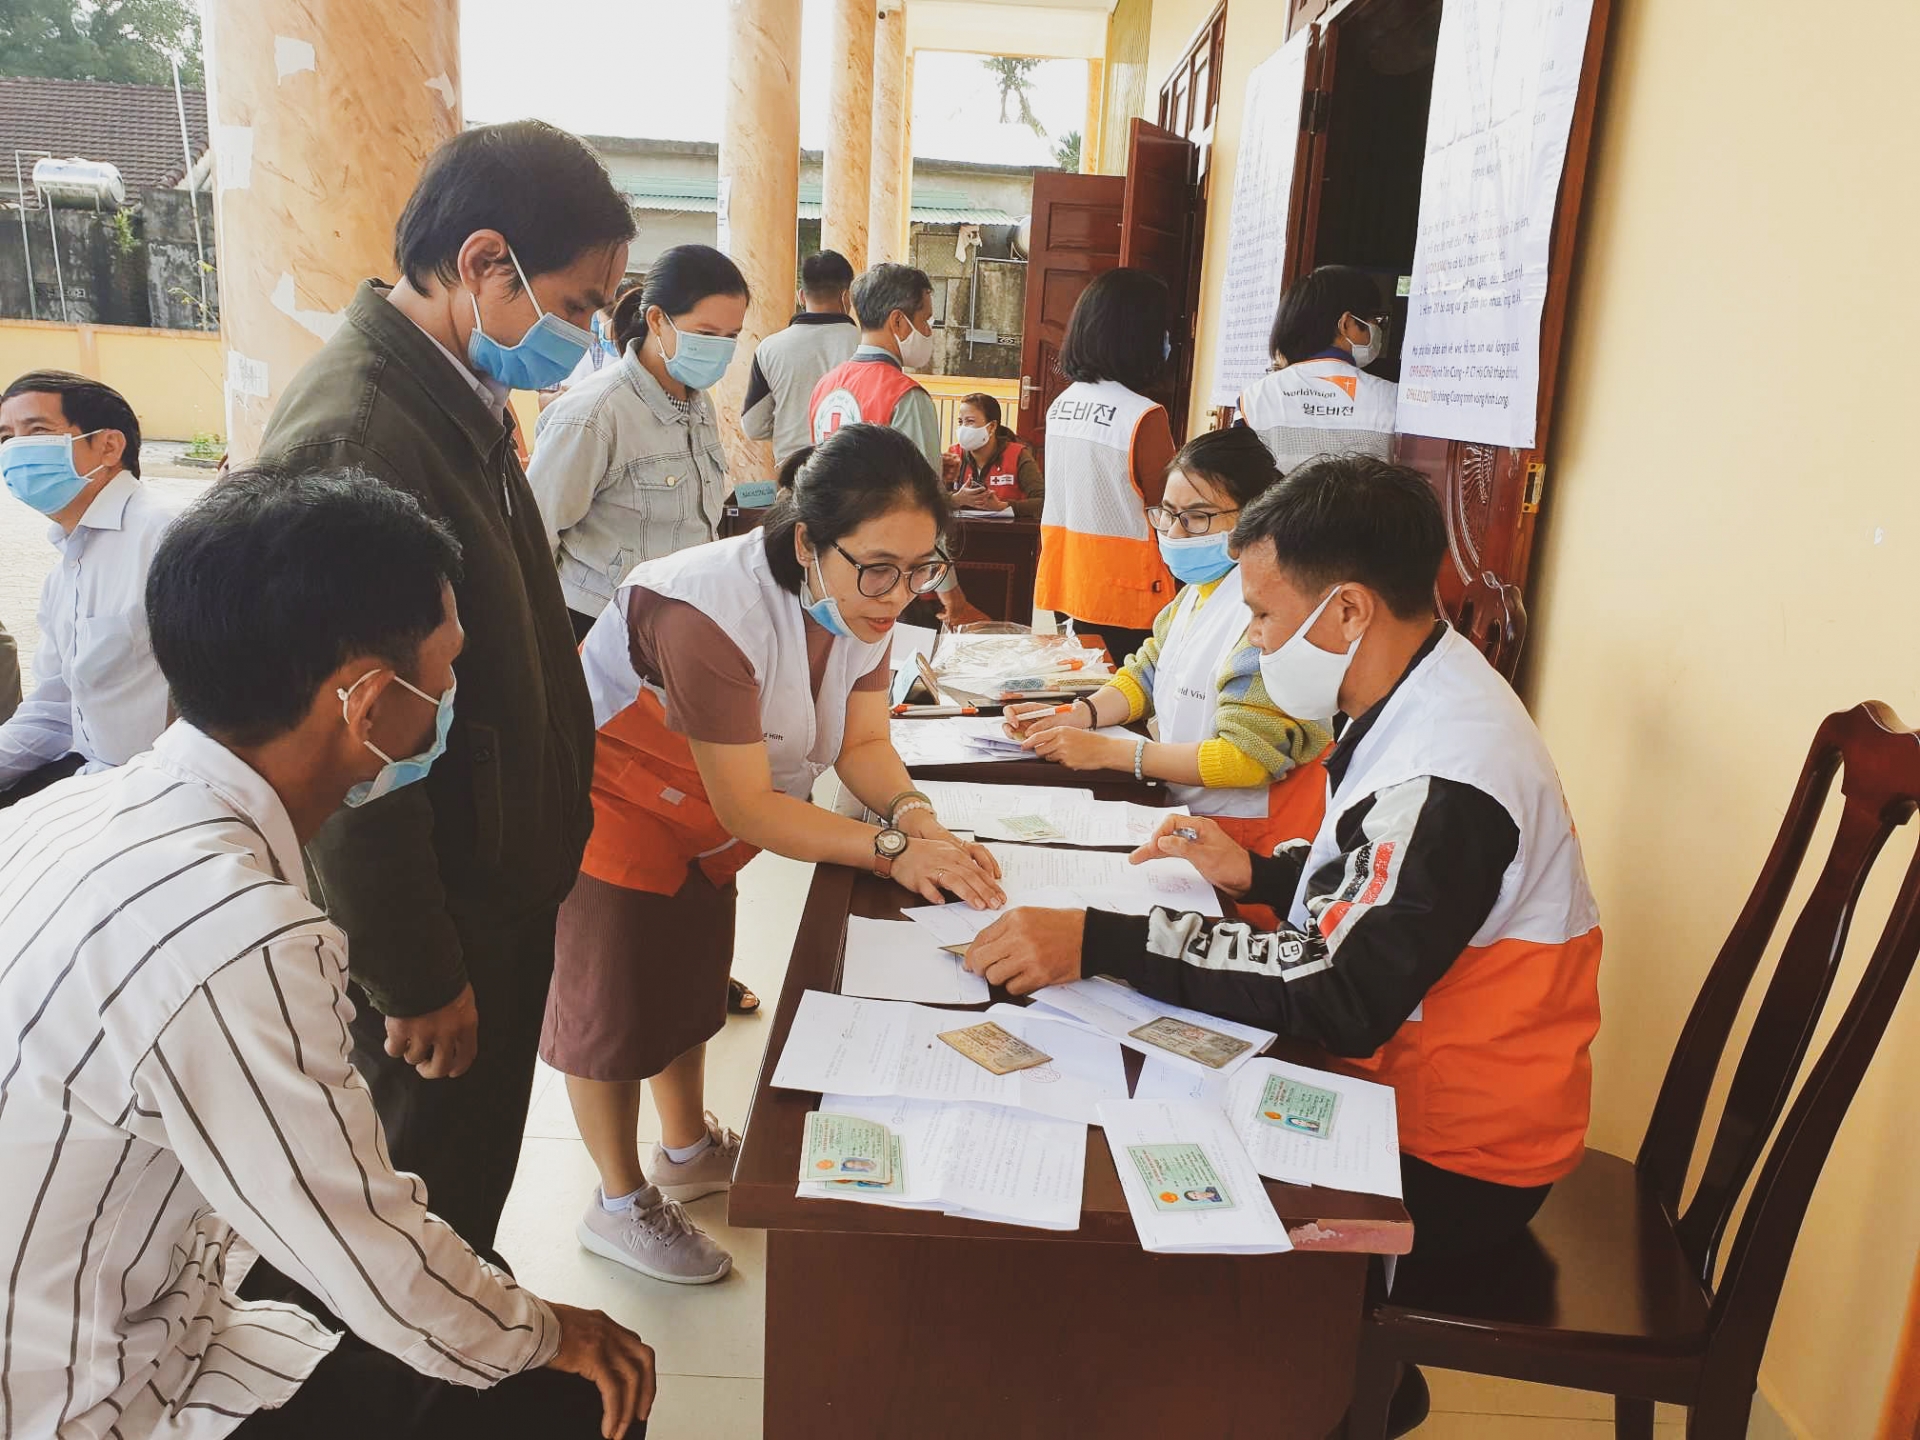 Flood affected people in Quang Ngai receive support from NGO